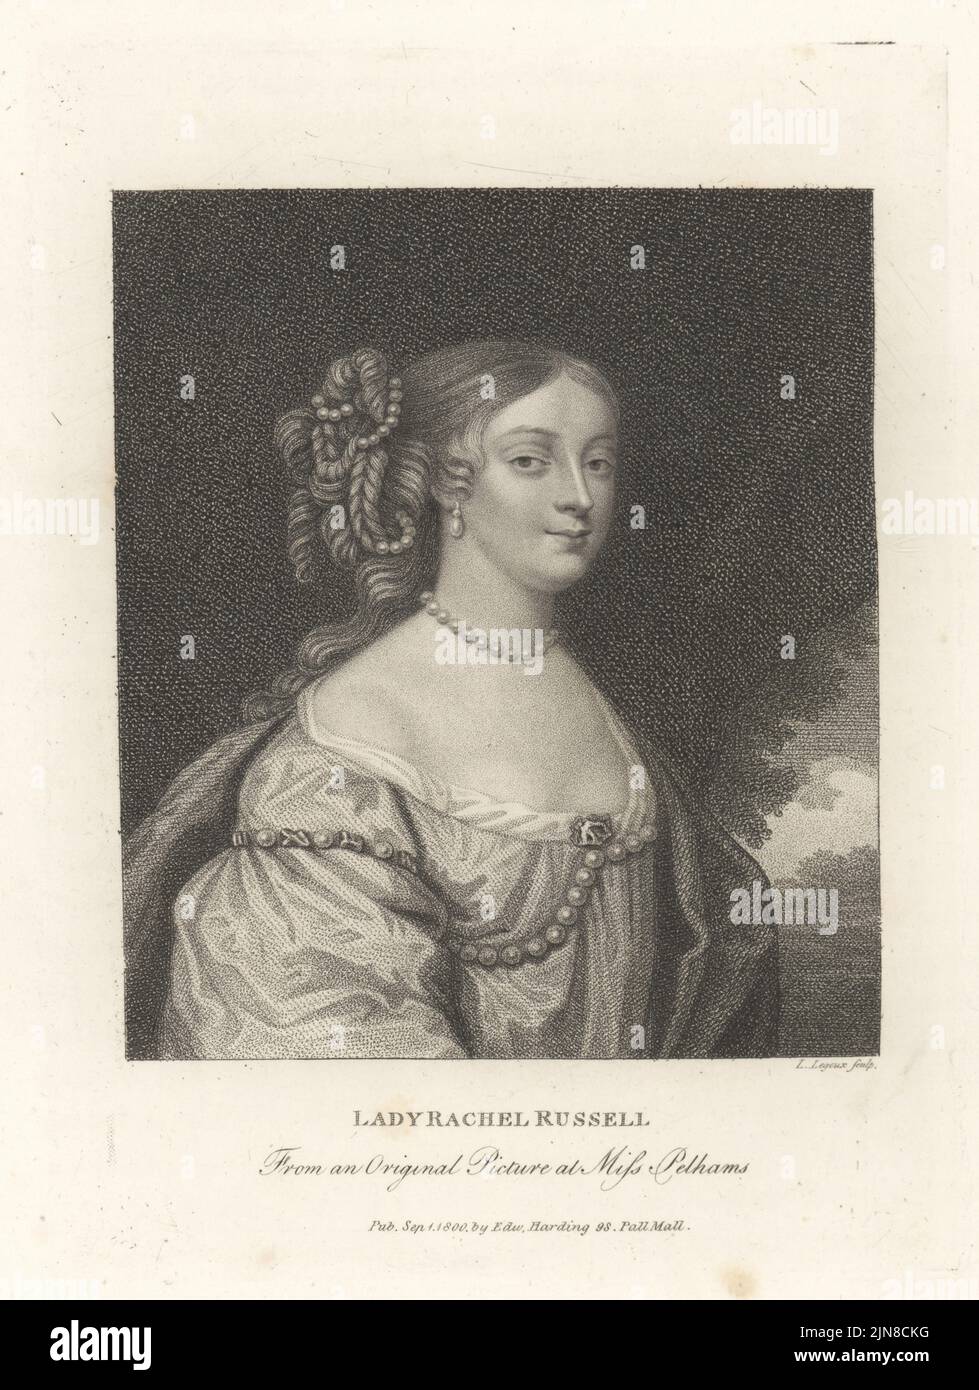 Rachel, Lady Russell, English noblewoman, heiress, and author c. 1636-1723, Her second husband William, Lord Russell, was implicated in the Rye House Plot and executed in 1683. With pearls in her hair, low-cut gown. Lady Rachel Russell. After an original picture at Miss Pelhams. Copperplate engraving by Louis Legoux from John Adolphus’ The British Cabinet, containing Portraits of Illustrious Personages, printed by T. Bensley for E. Harding, 98 Pall Mall, London, 1800. Stock Photo